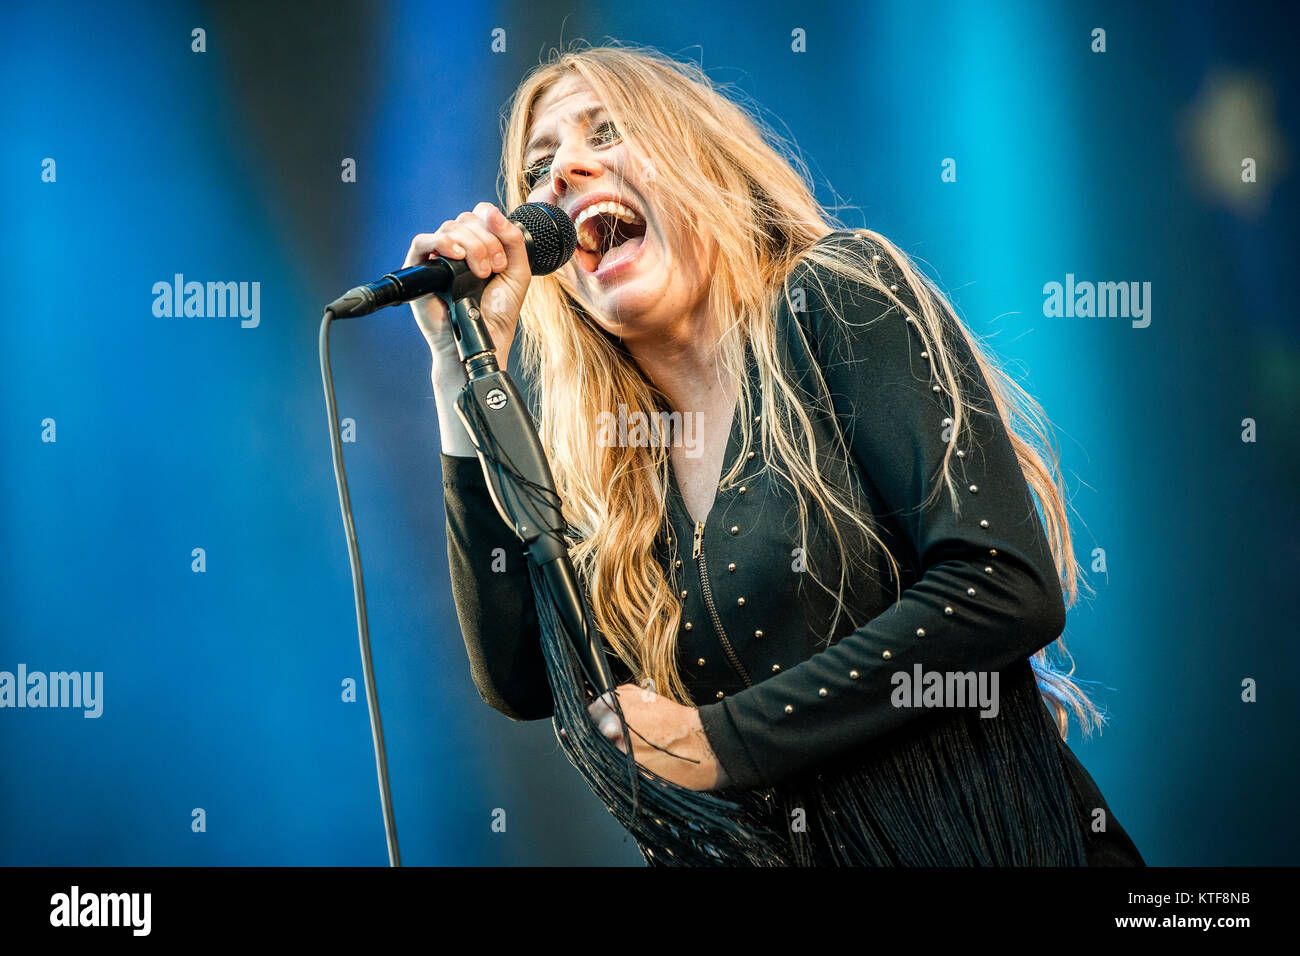 The Swedish rock band Blues Pills performs a live concert at the Norwegian music festival Tons of Rock 2016. Here singer Elin Larsson is seen live on stage. Norway, 23/06 2016. Stock Photo